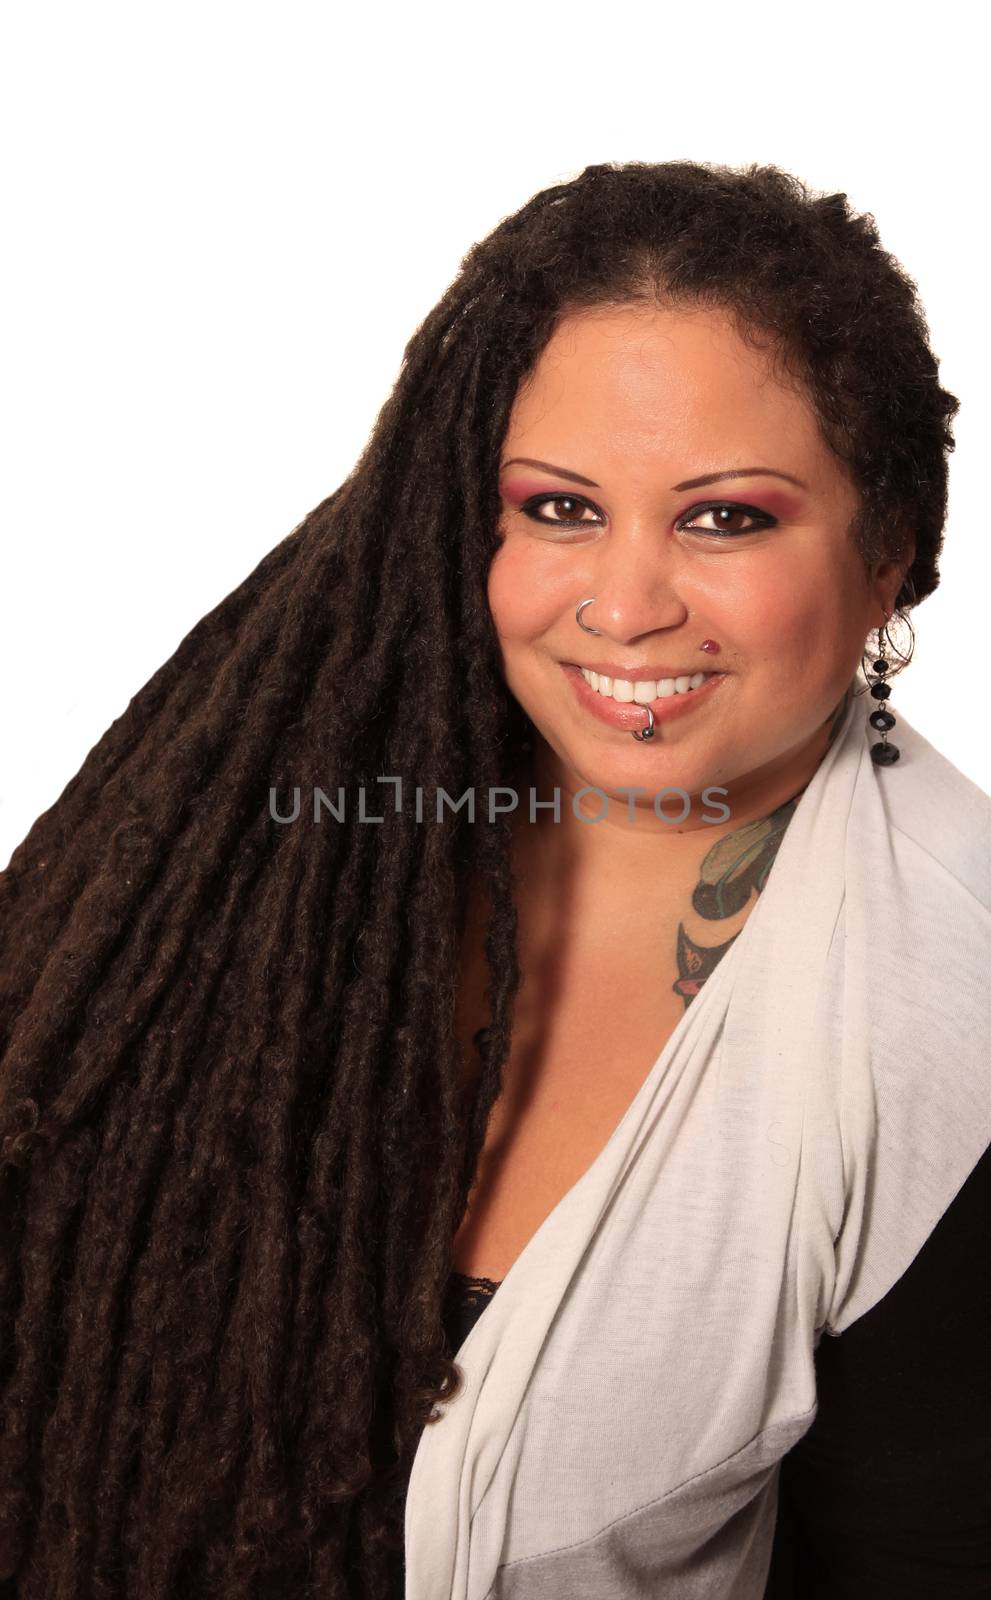 Beautiful ethnic curvaceous woman with long dreadlocks, tattoos and piercings, on a white background